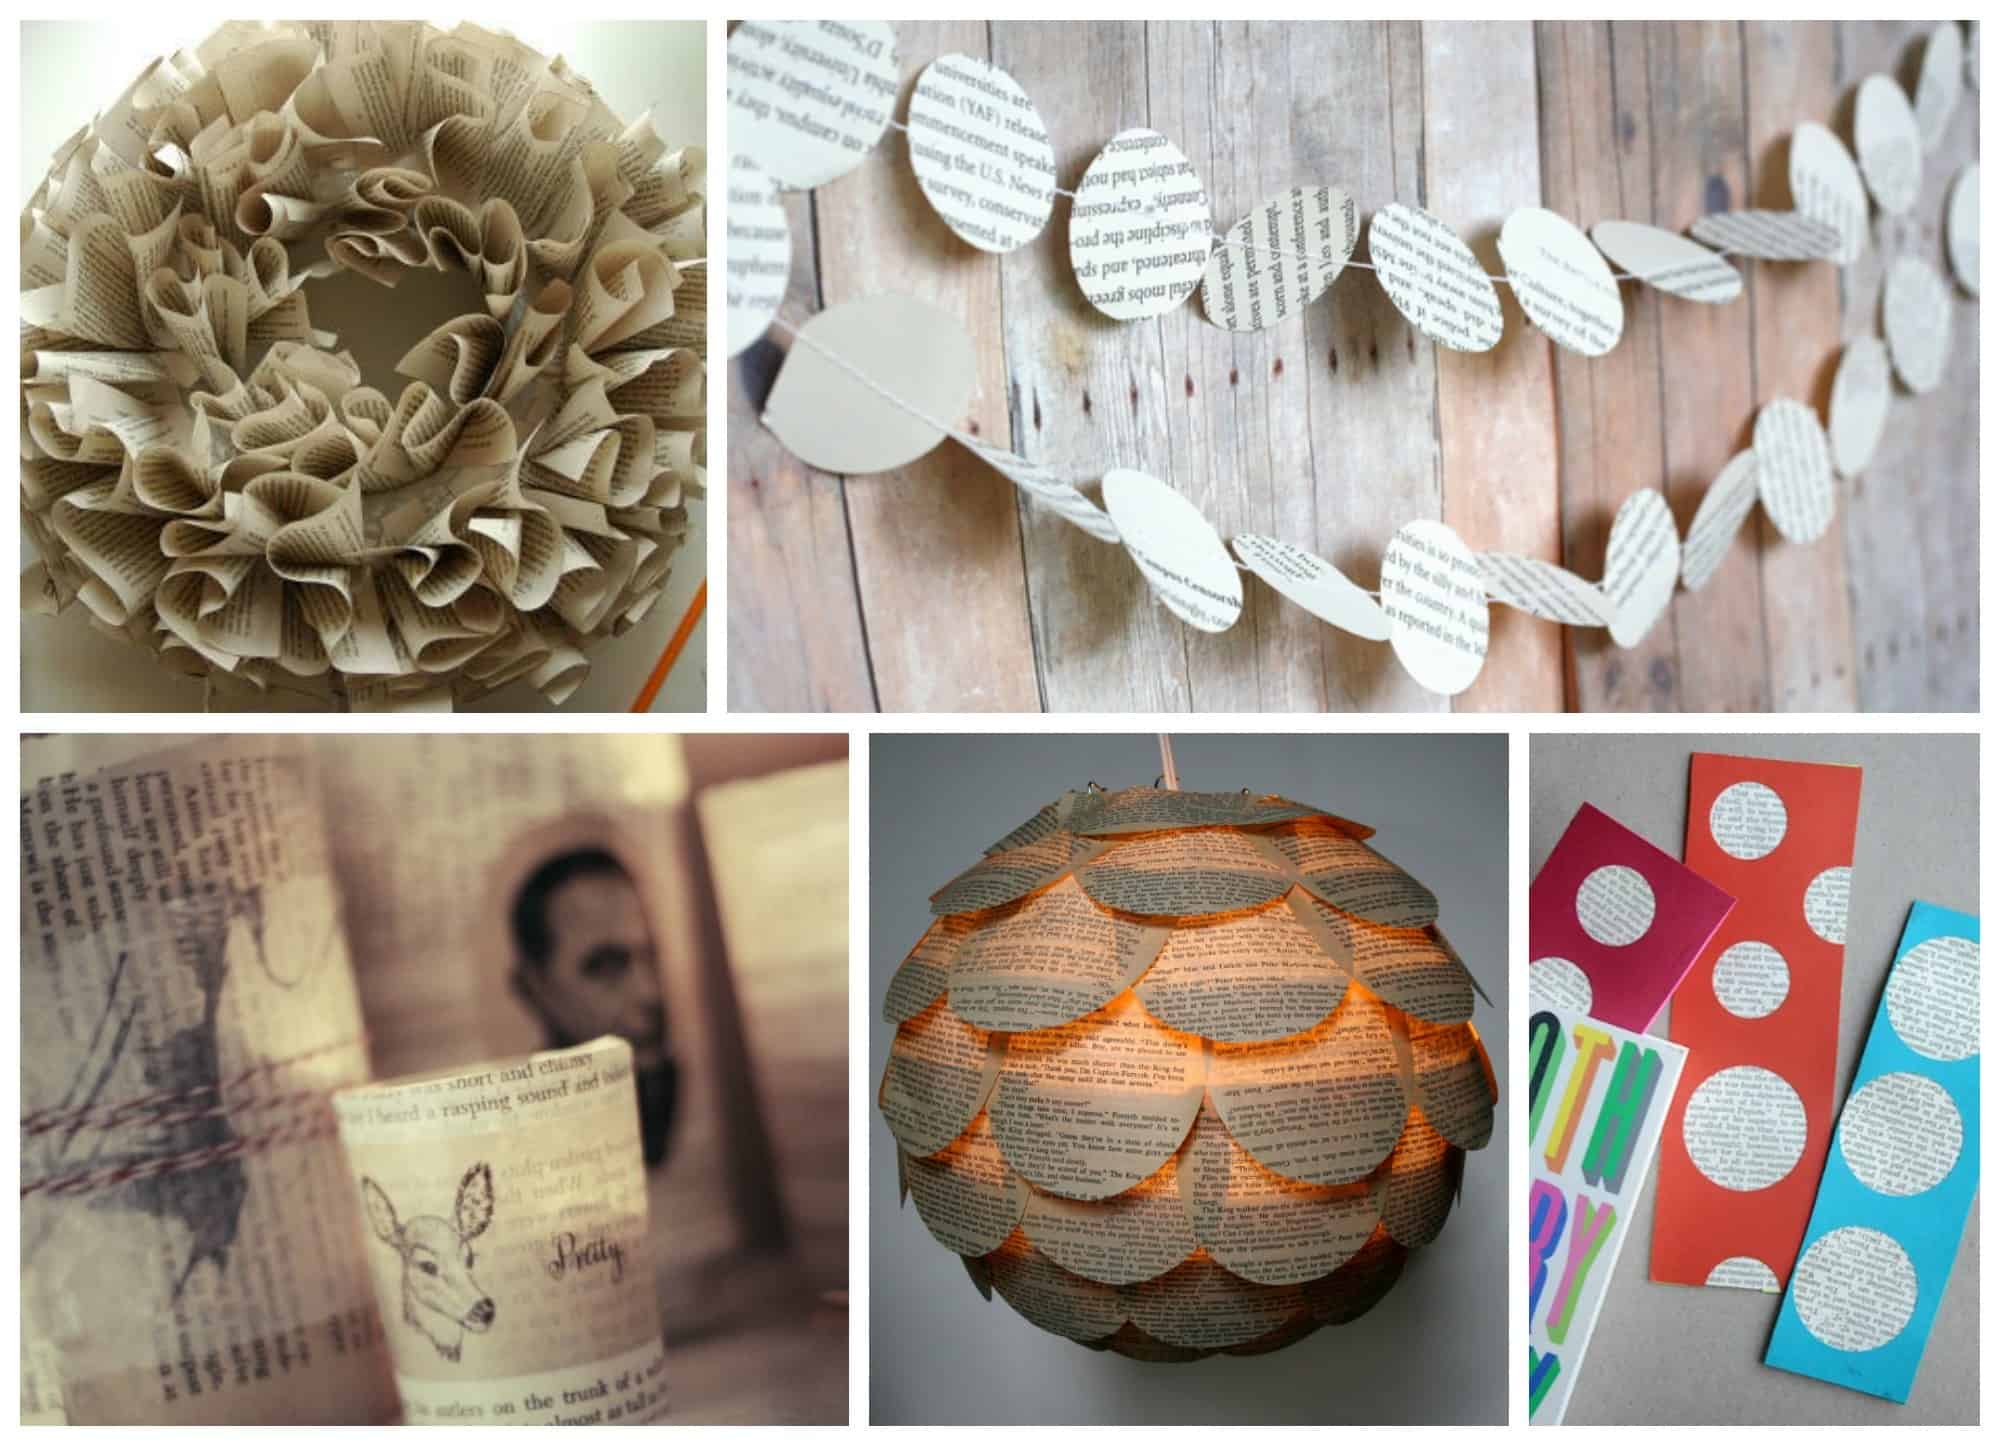 10 excessively creative projects to make from or with old books. Time to raid the thrift stores.